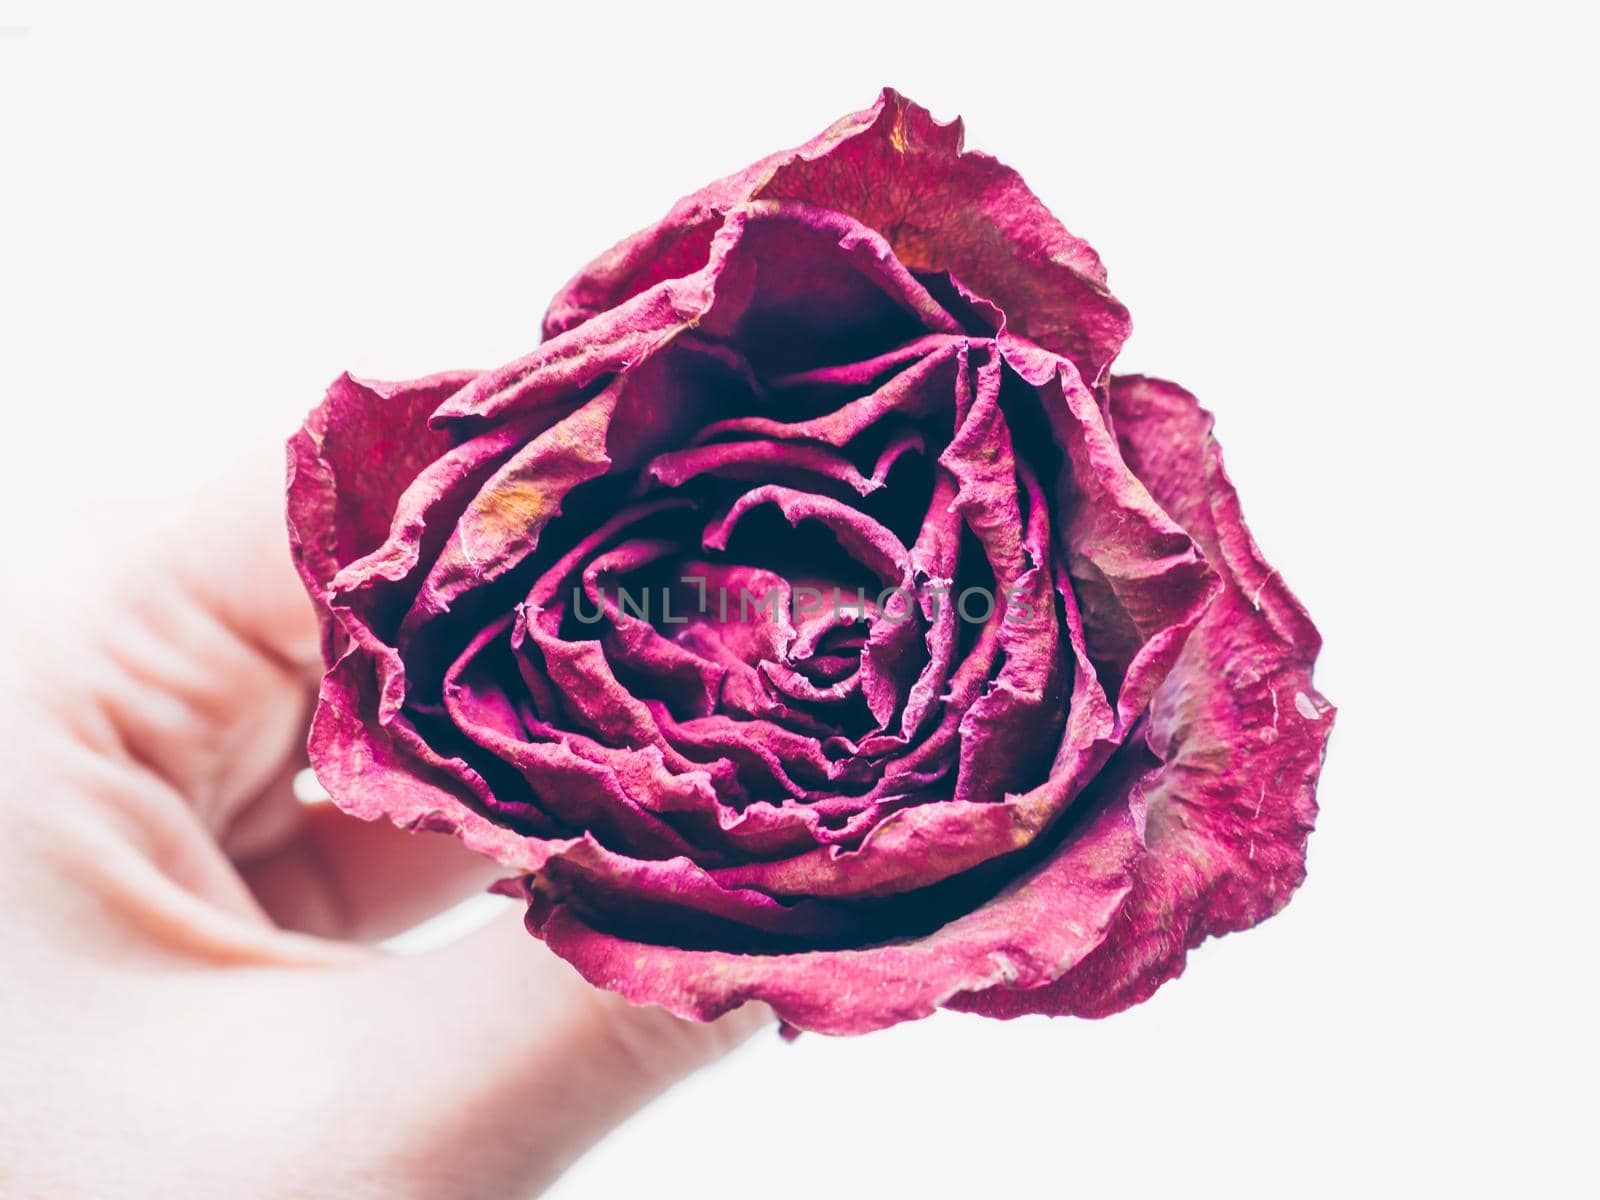 Memory, deathy, loss concept. Woman hand holding dried red rose flower isolate on white background. Traditional symbol of a broken heart and lost love. Life anf dead. Soft focus. Close up